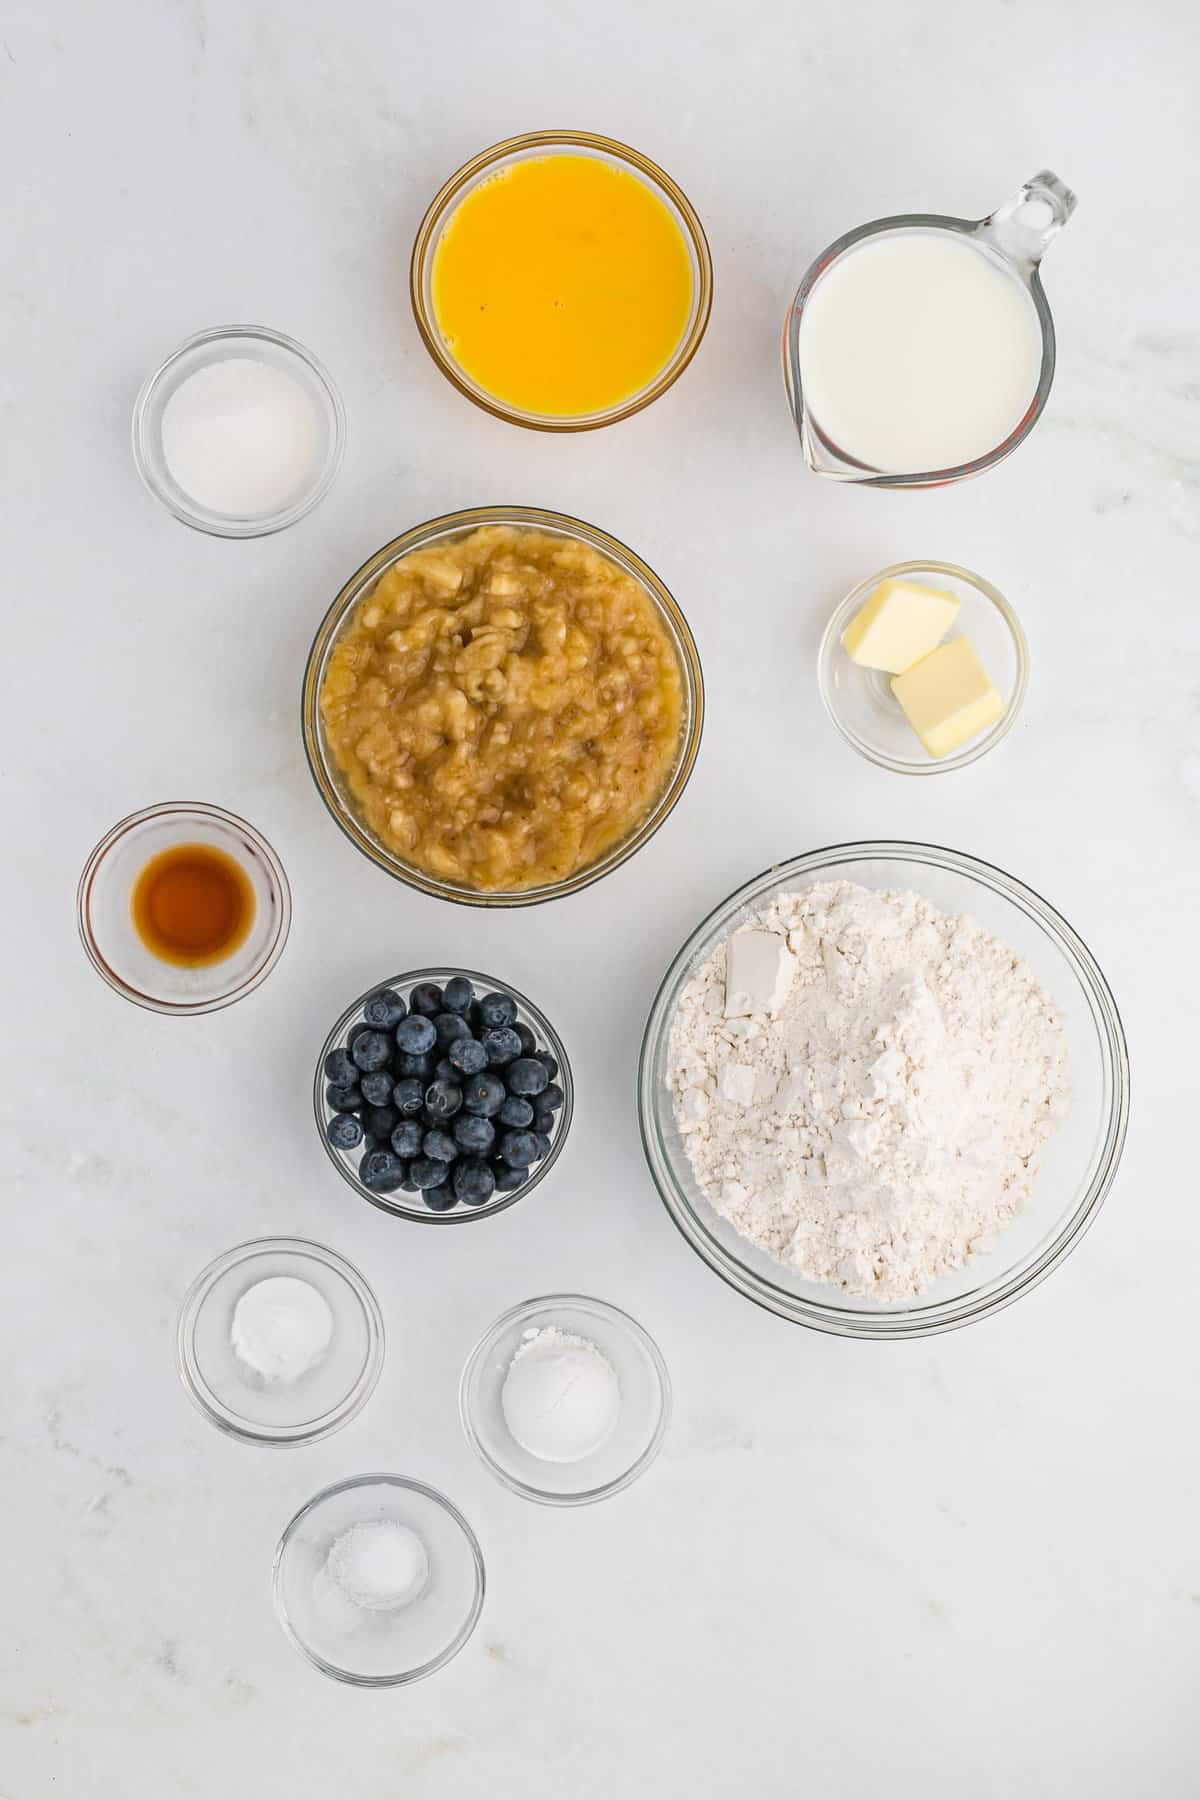 Ingredients needed, including bananas and blueberries.